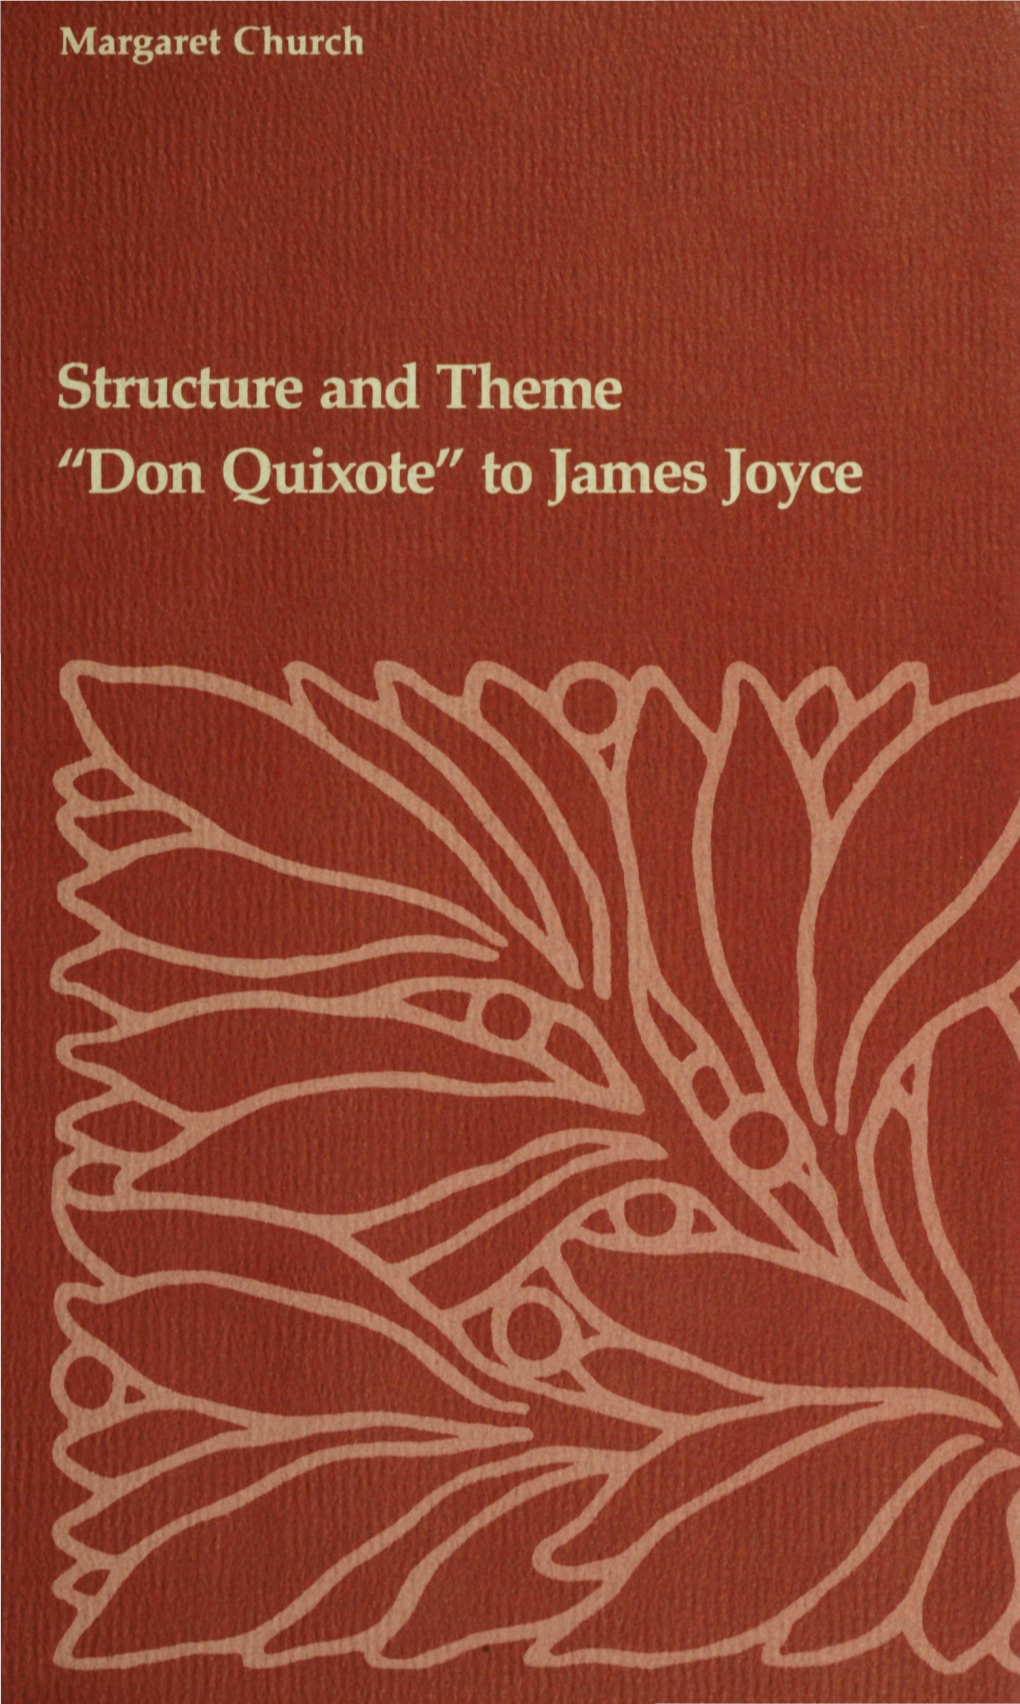 Structure and Theme "Don Quixote" to James Joyce $15.00